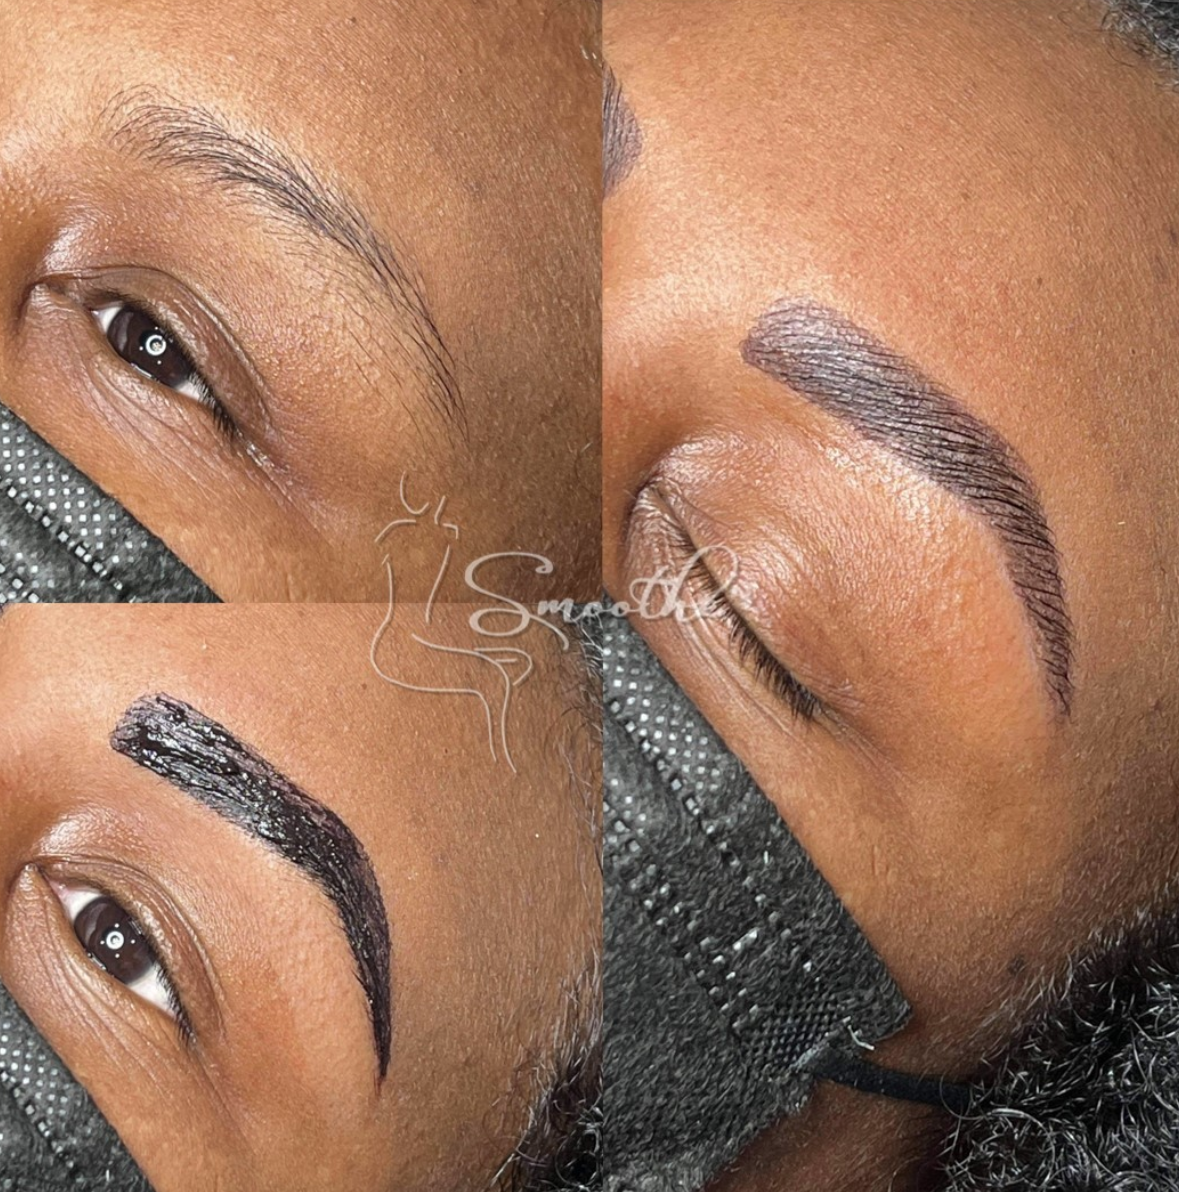 Brow Wax and Tint at Smoothe LLC in Raleigh NC